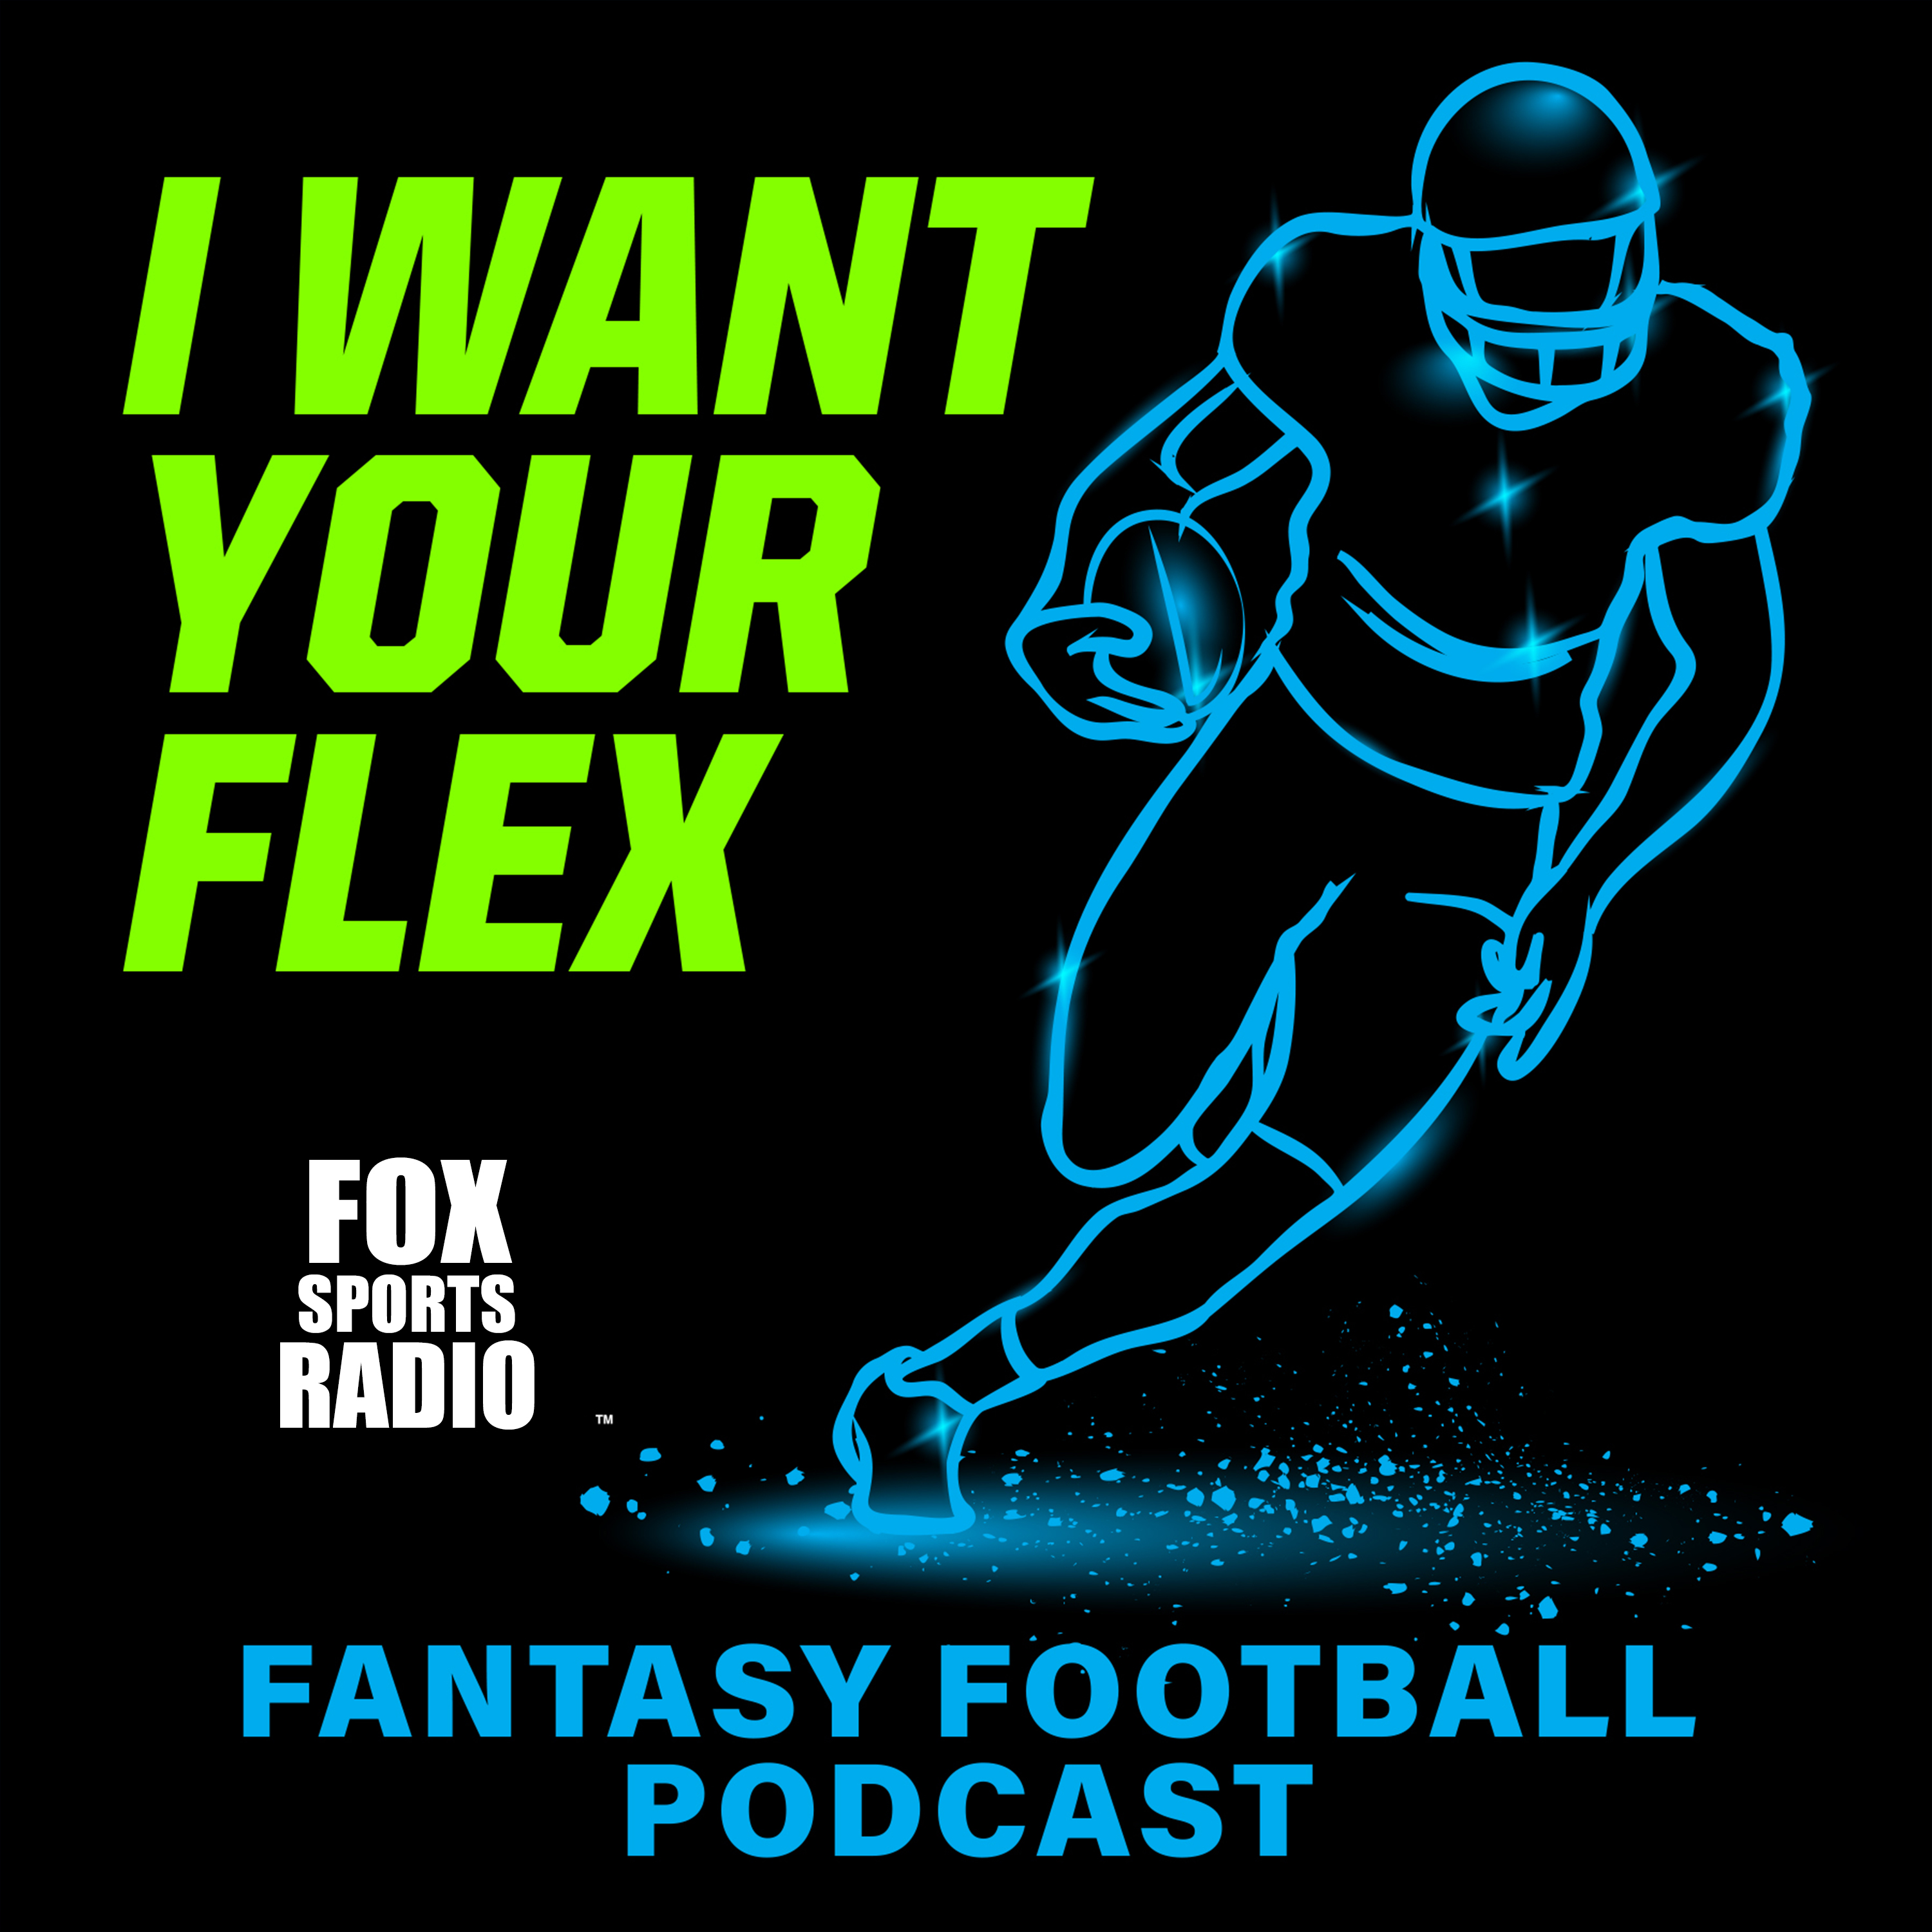 I WANT YOUR FLEX - Week 15 Rankings and Hot Plays